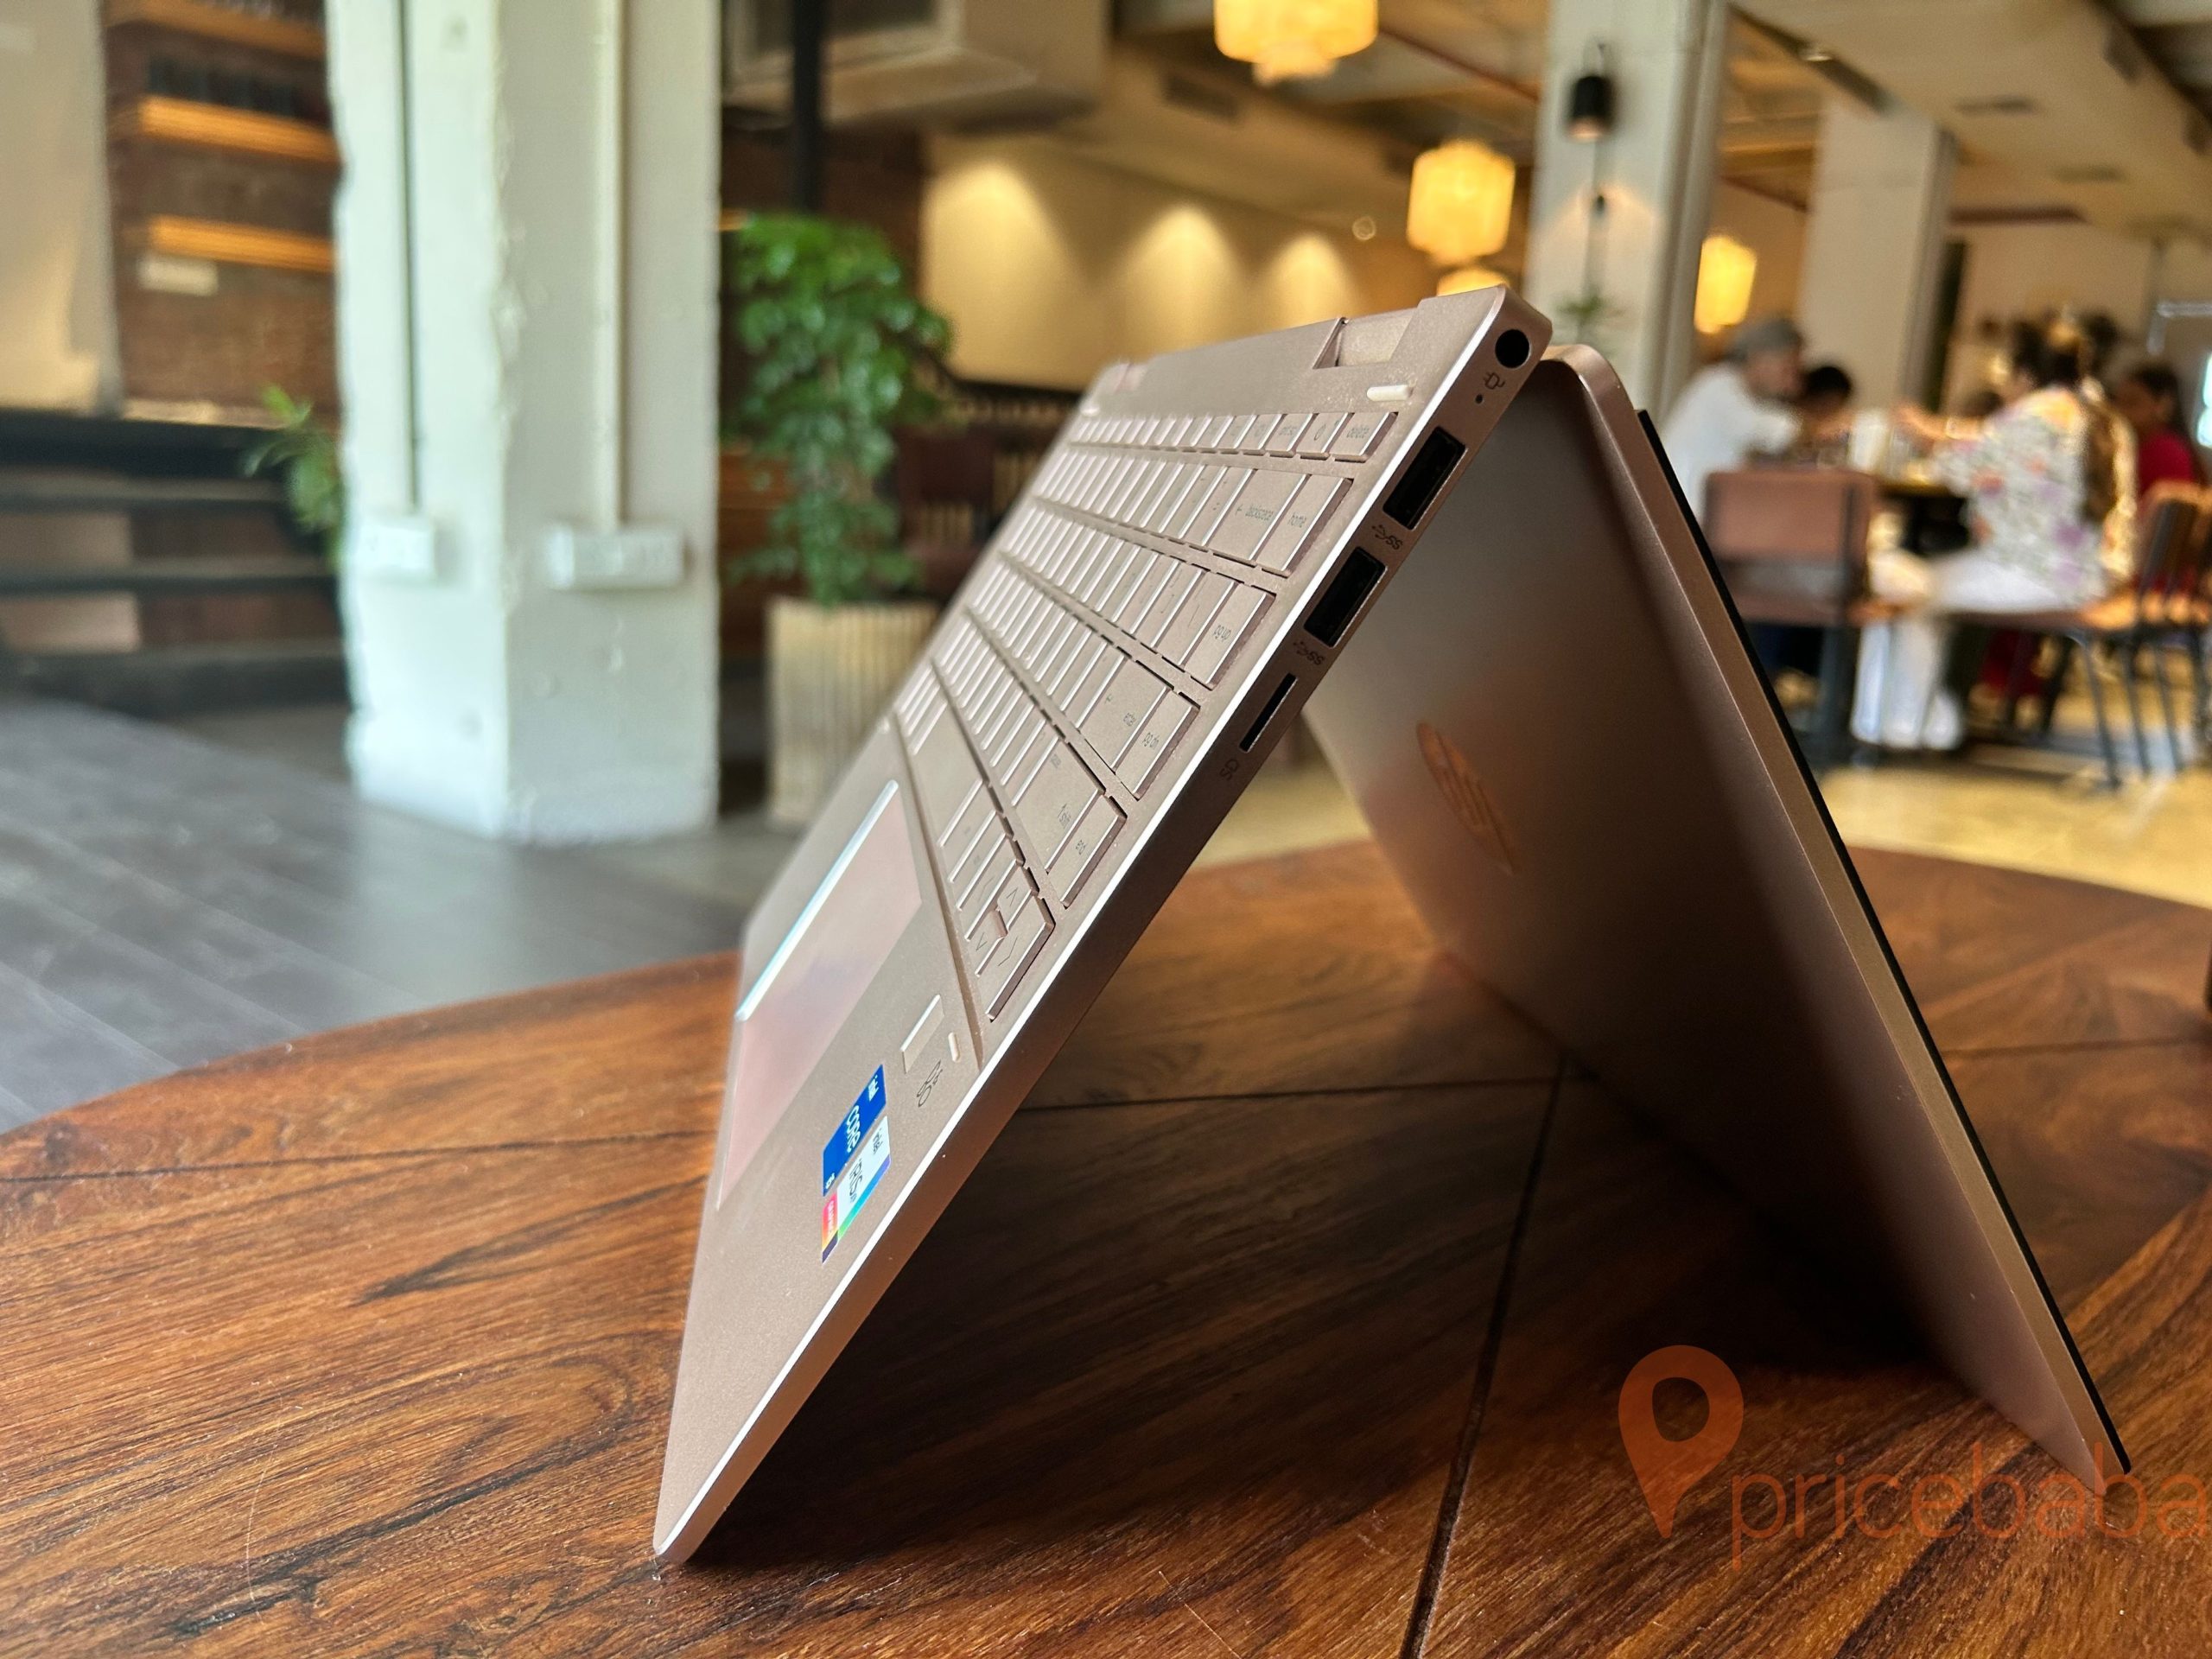 HP Pavilion x360 2-in-1 14 Laptop Review